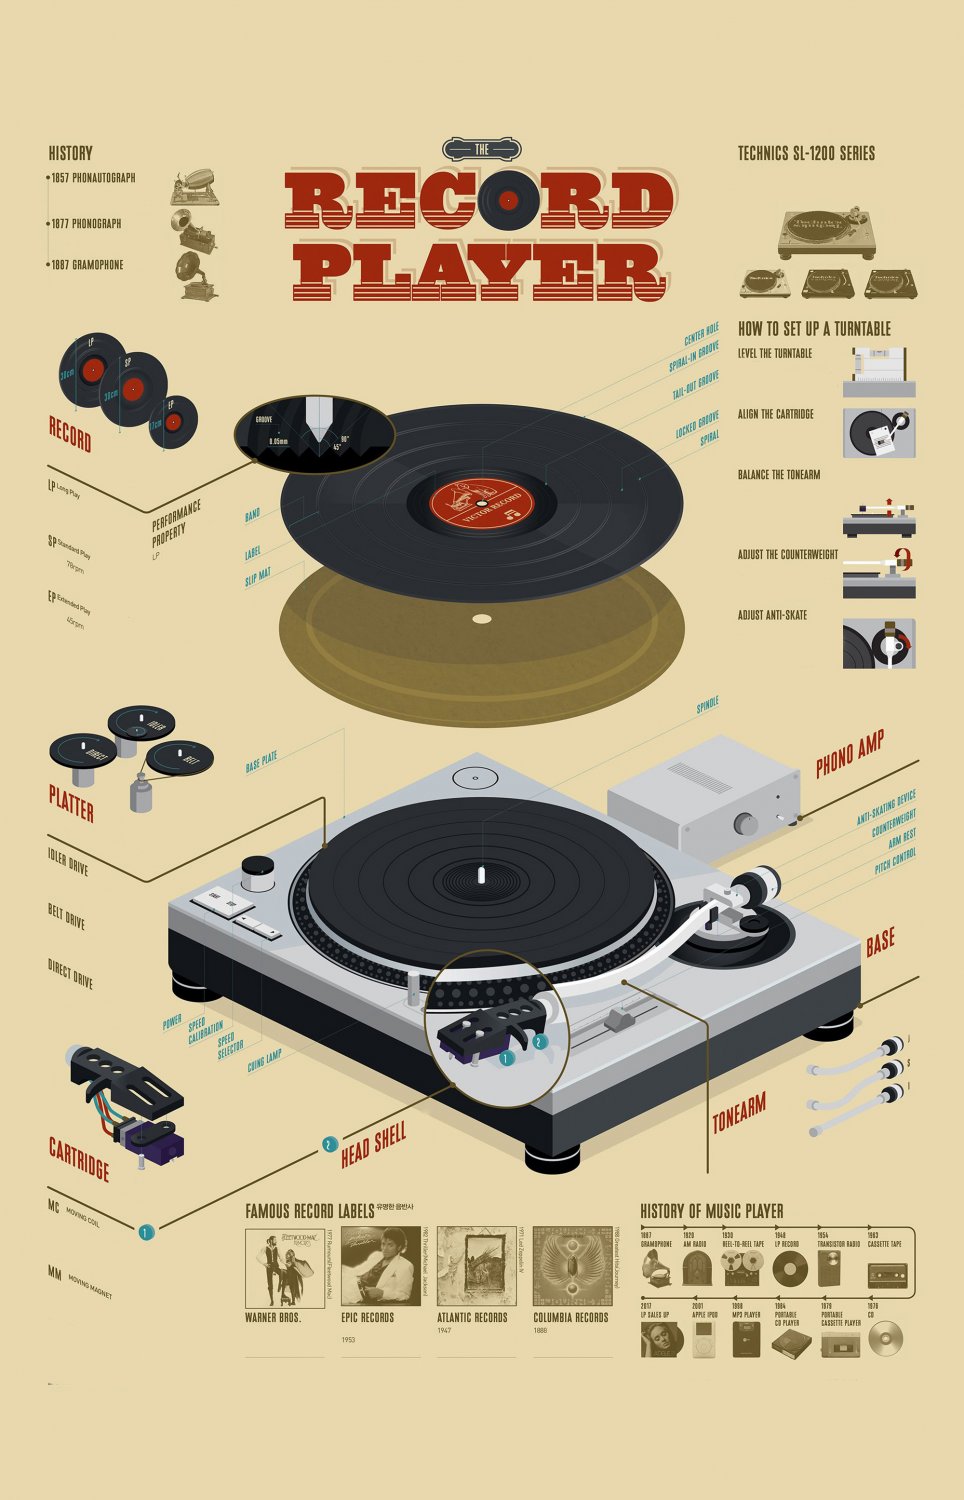 The Record Player Infographic Chart 18"x28" (45cm/70cm) Poster